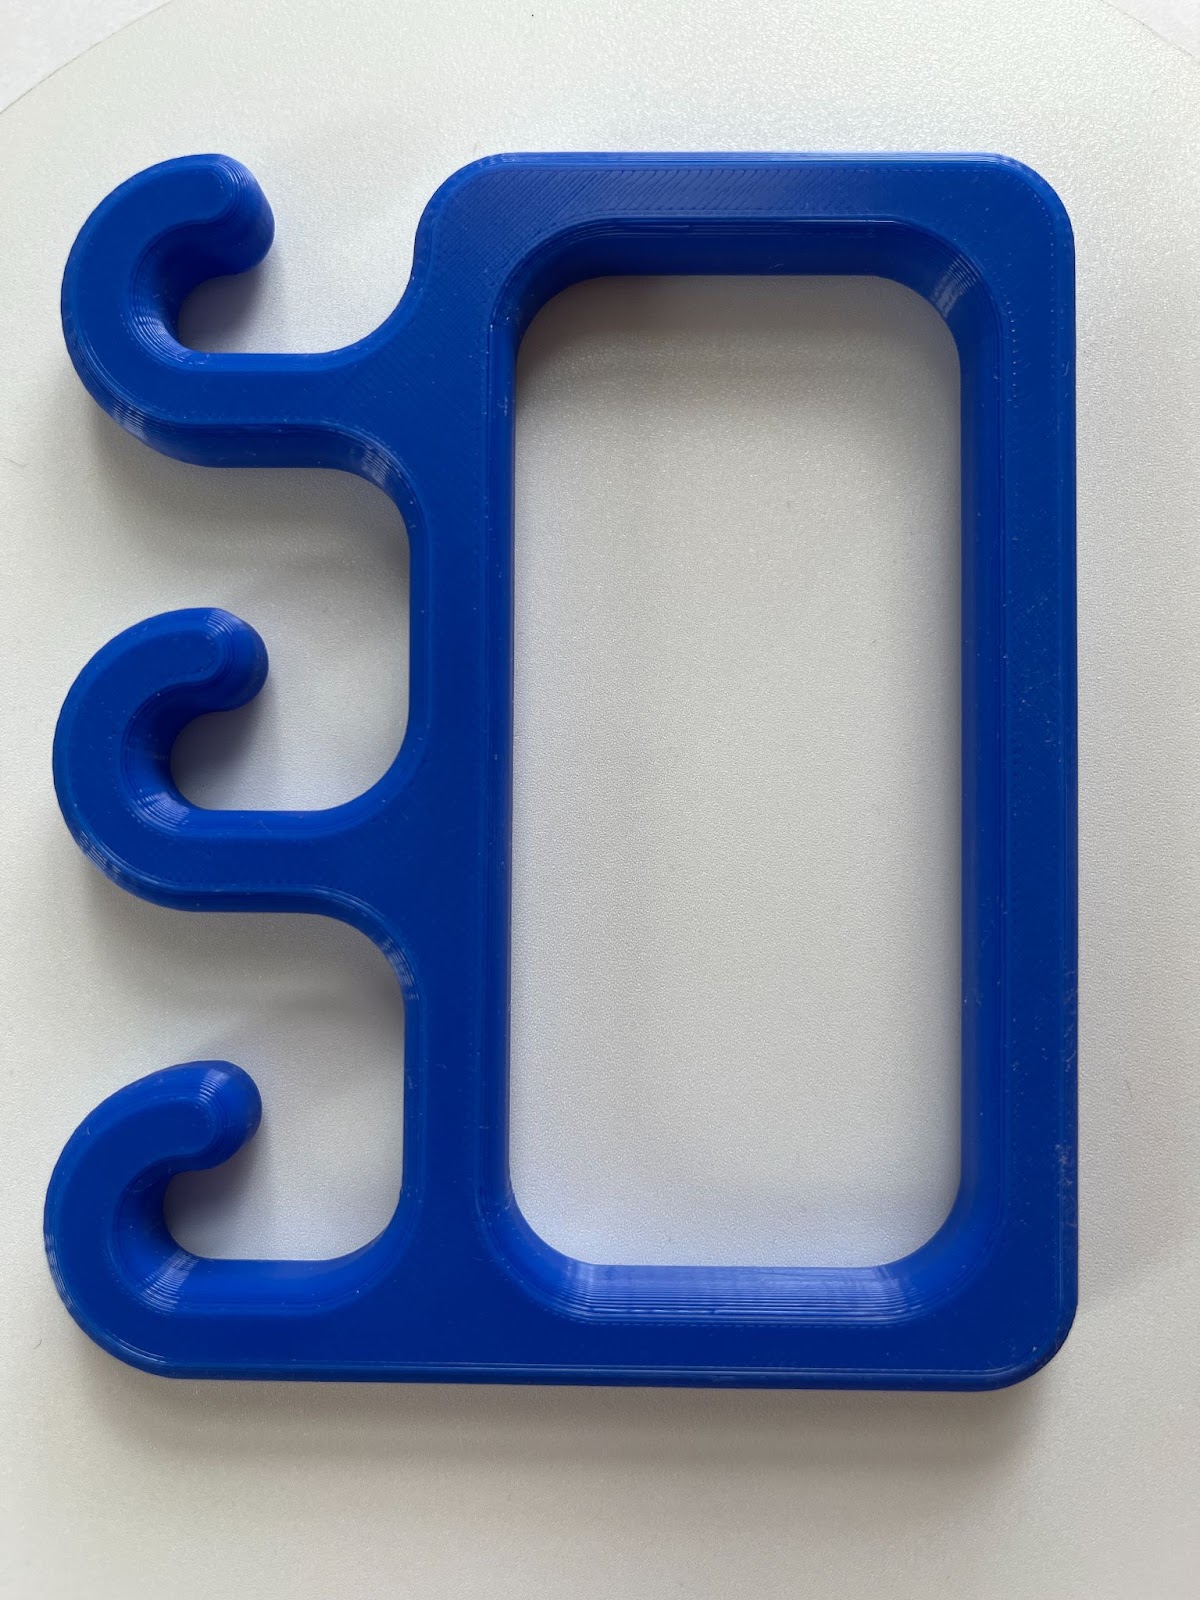 A blue, 3D printed handle with three hooks on the bottom